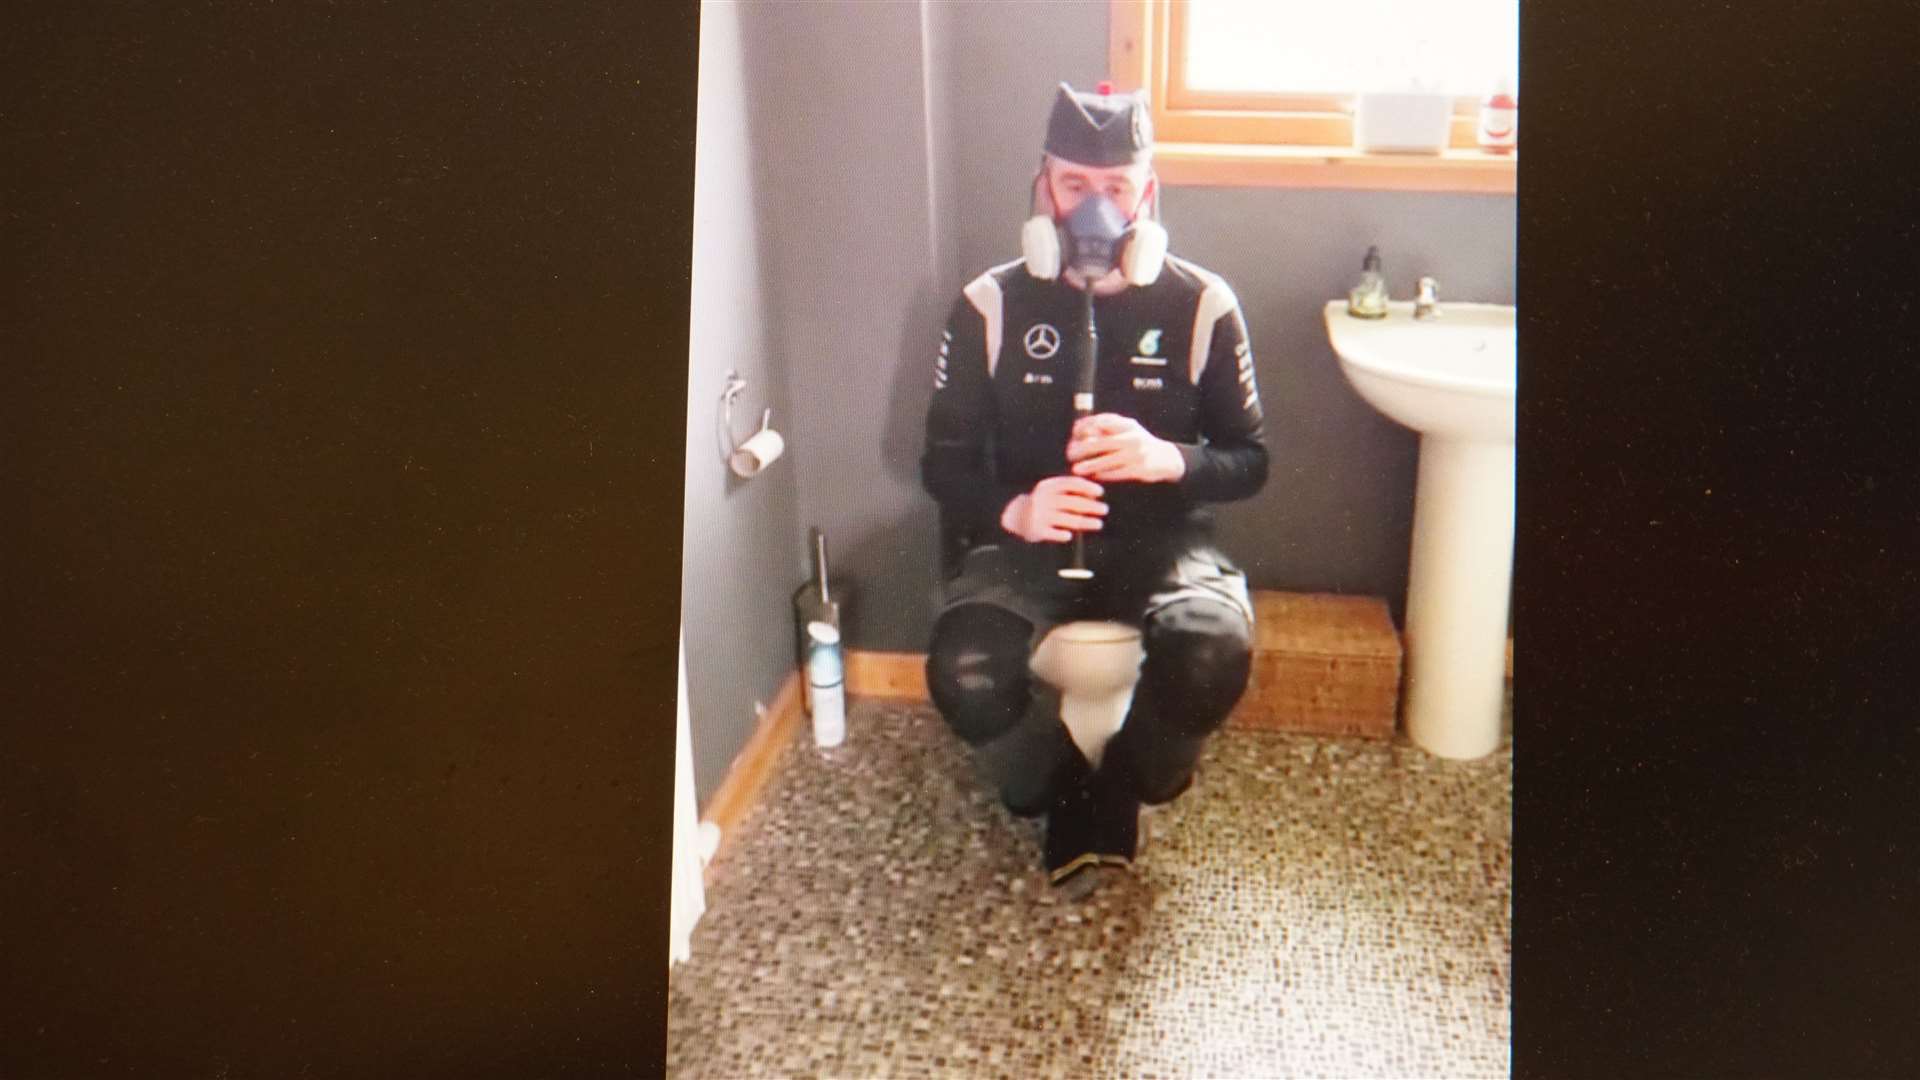 A frame grab from the hilarious video shows piper Alan Plowman, who has played in the band since 1988, sitting on the toilet and wearing a protective mask.